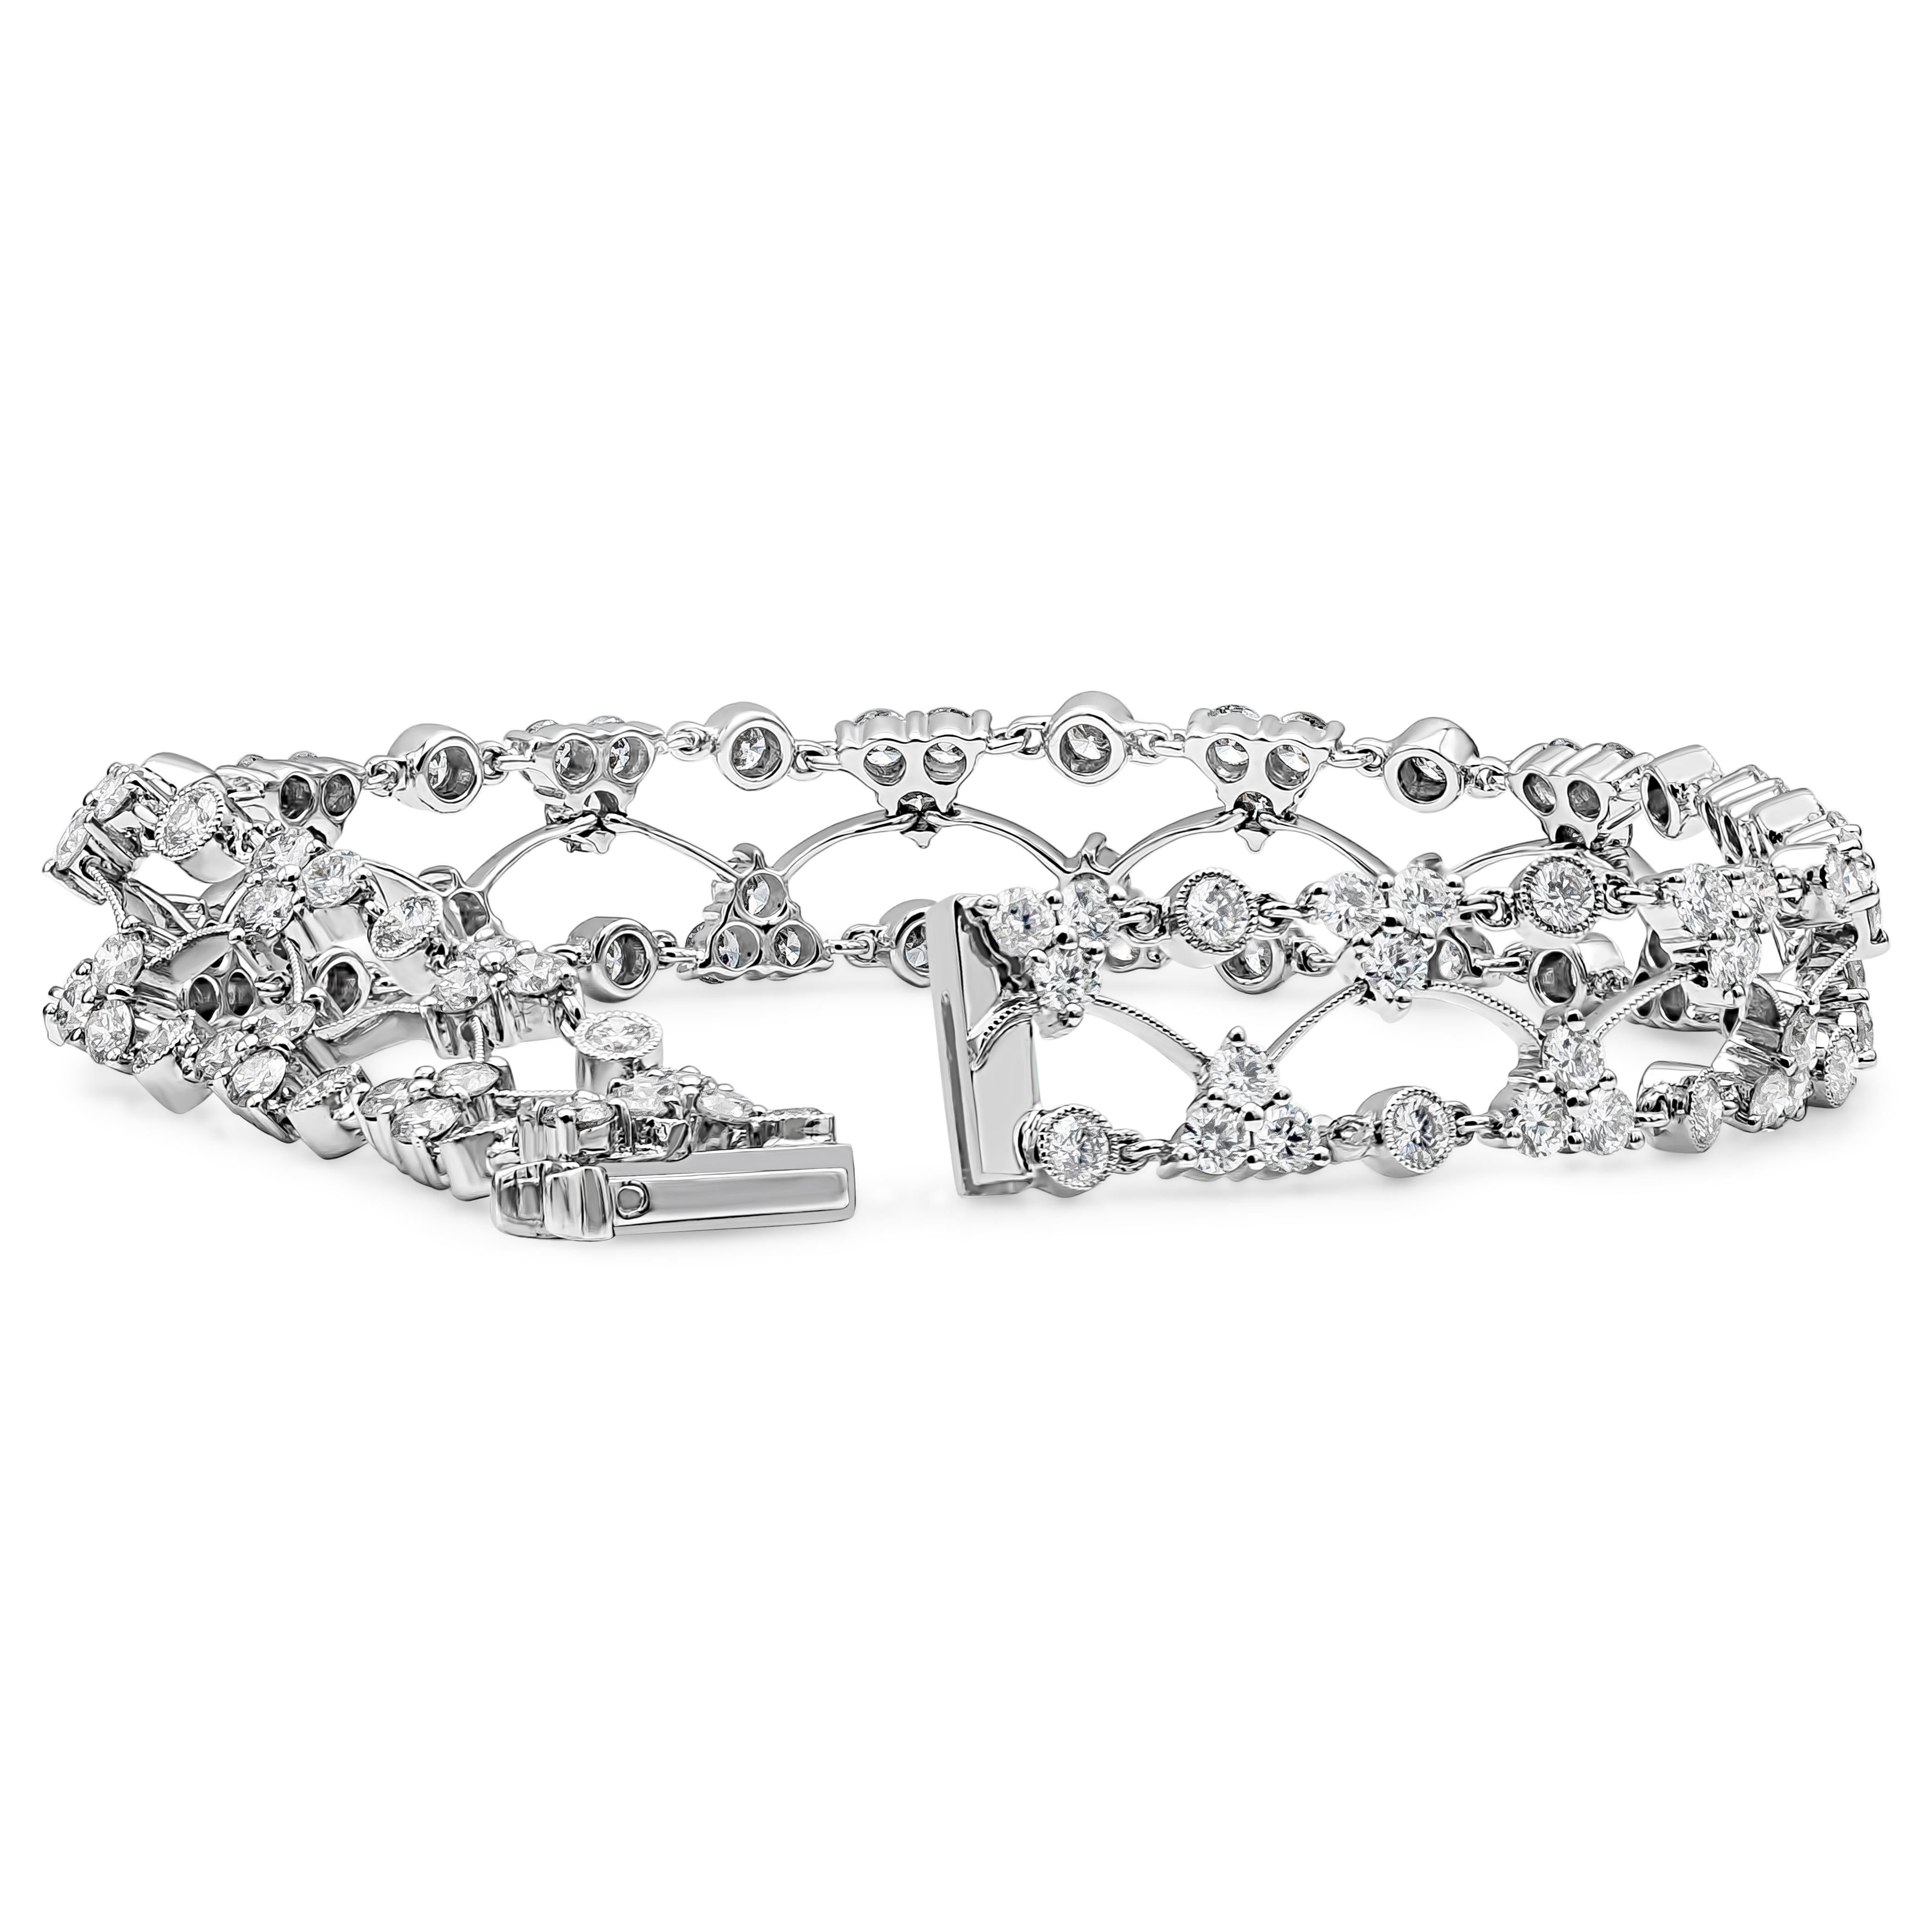 A beautiful chic open work diamond bracelet showcasing 4.75 carats total of round diamonds, set in an intricately filigree design setting. Made with 18K White Gold, 7 inches in Length. 

Roman Malakov is a custom house, specializing in creating